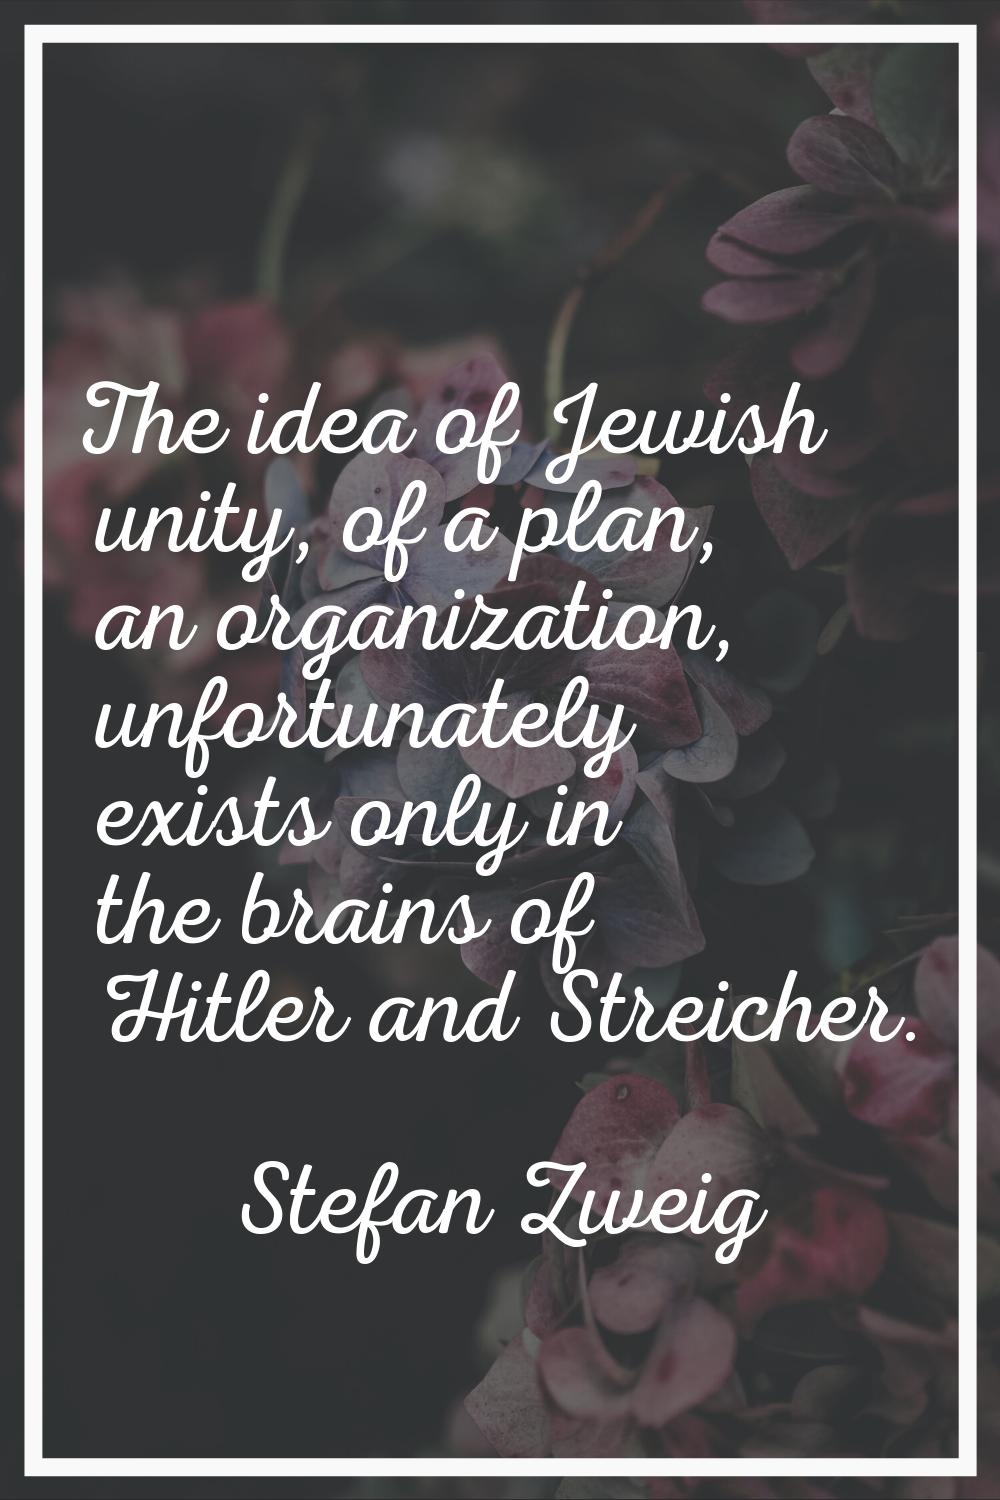 The idea of Jewish unity, of a plan, an organization, unfortunately exists only in the brains of Hi